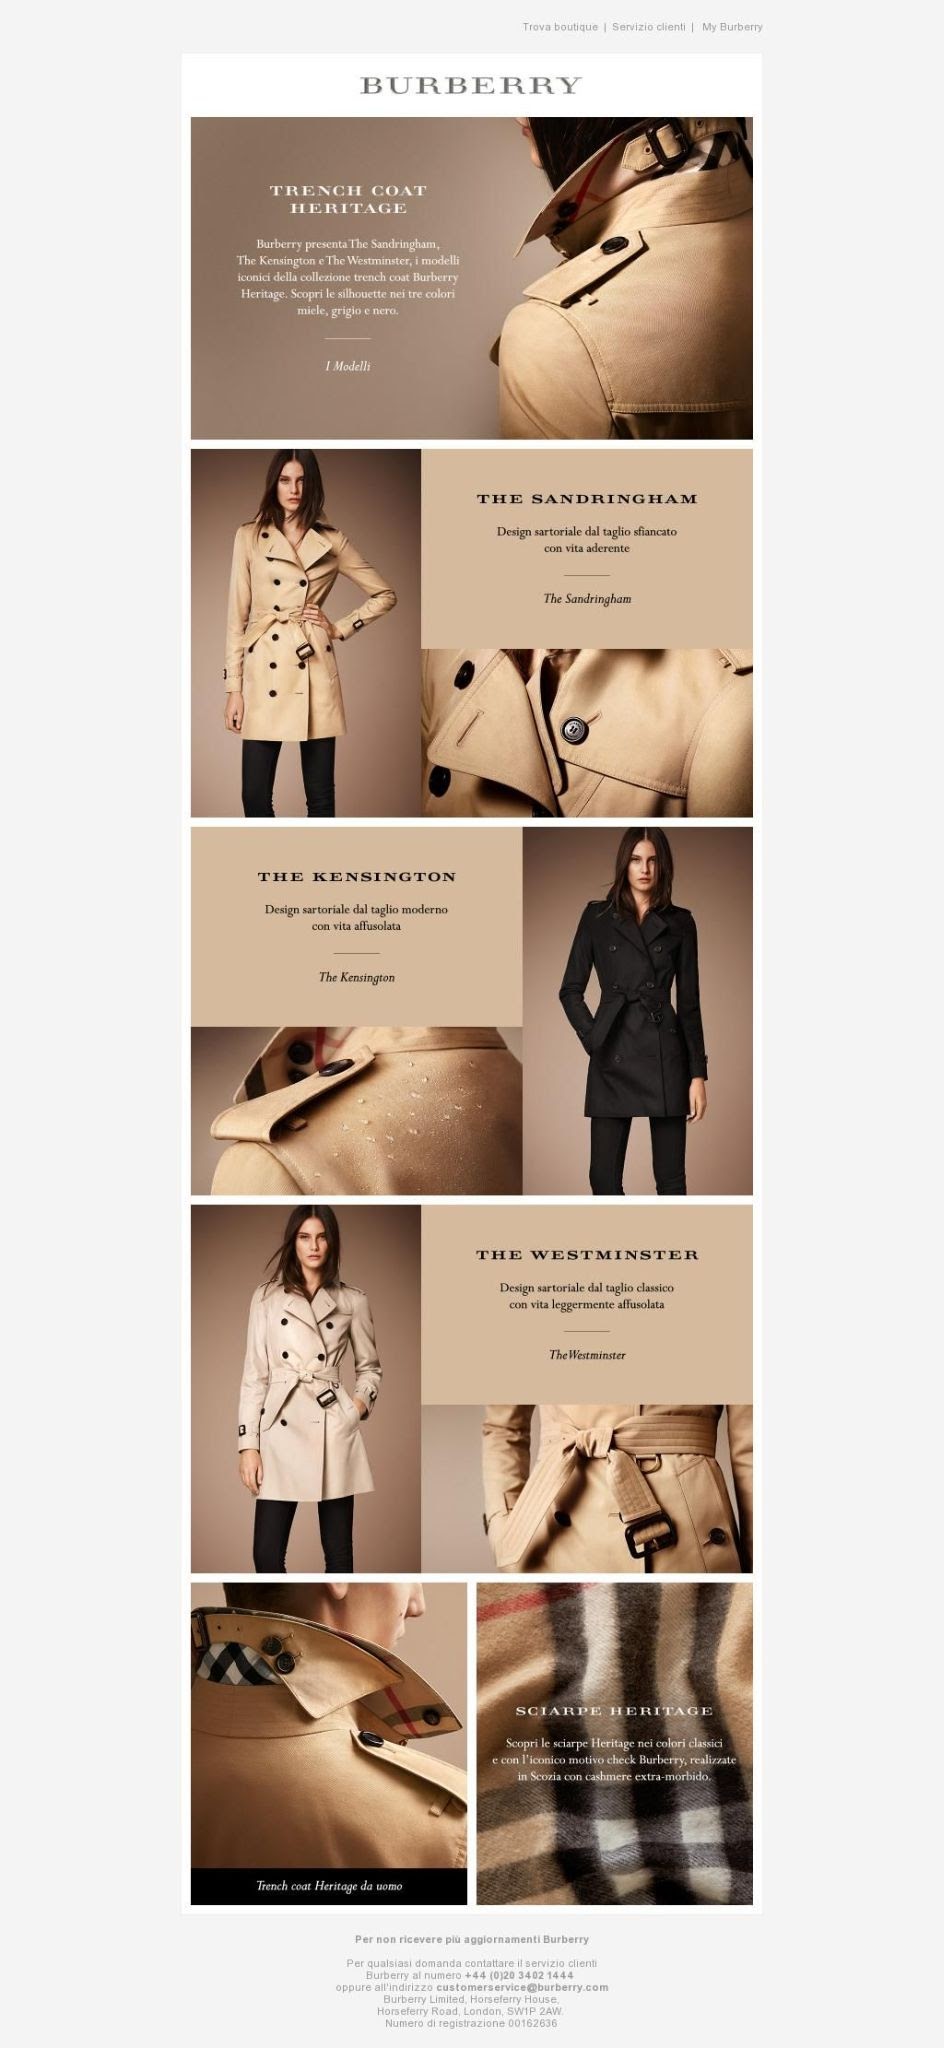 Burberry's Email Design